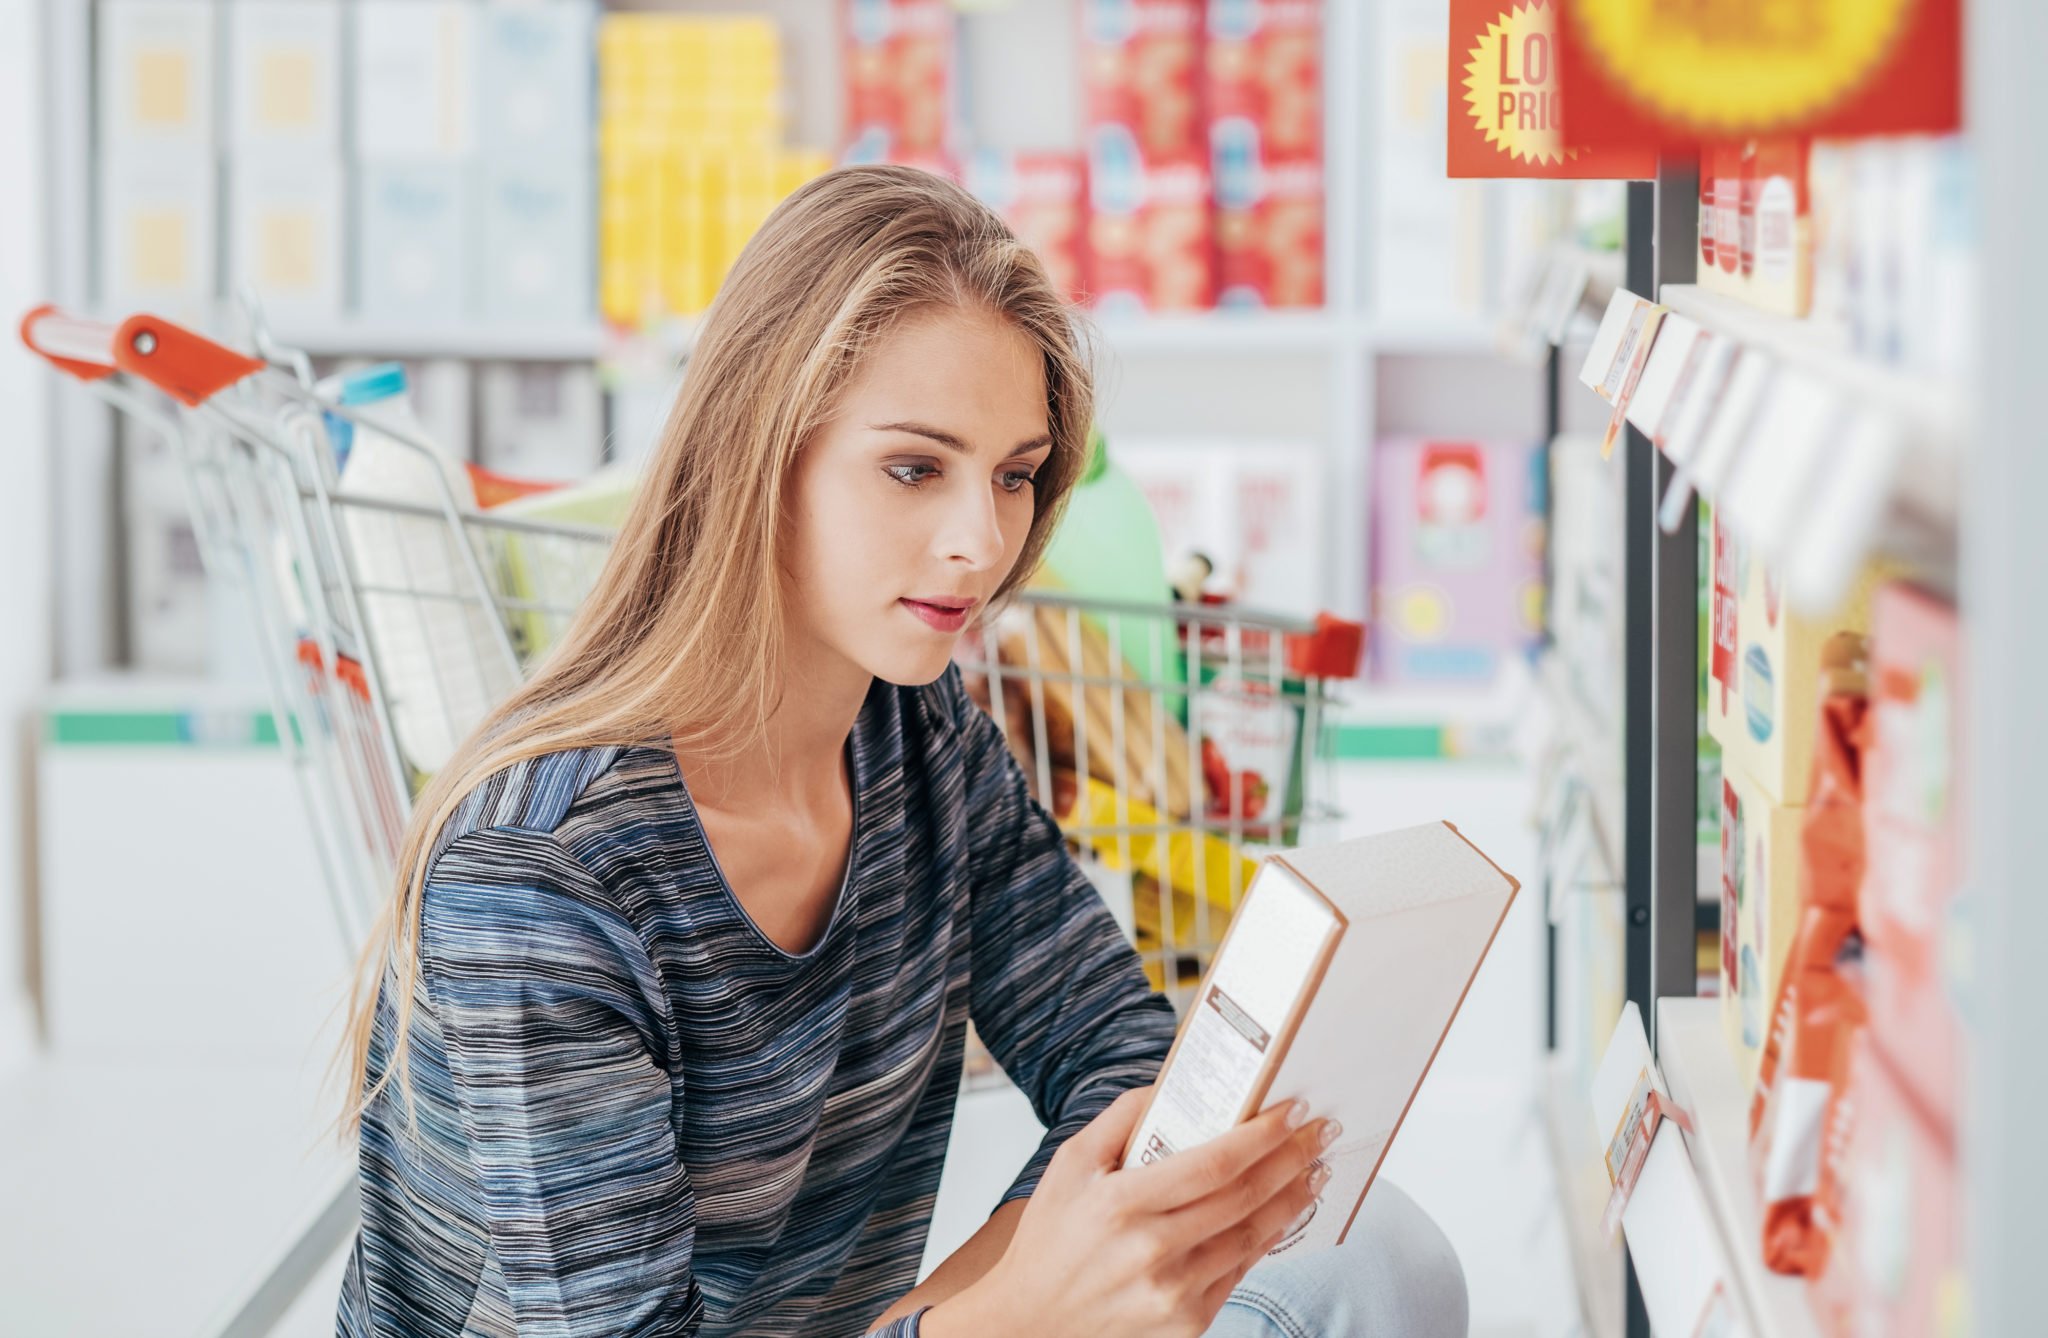 Young woman doing grocery shopping at the supermarket and reading a food label with ingredients on a box, using Nutrigenomics to inform health choices